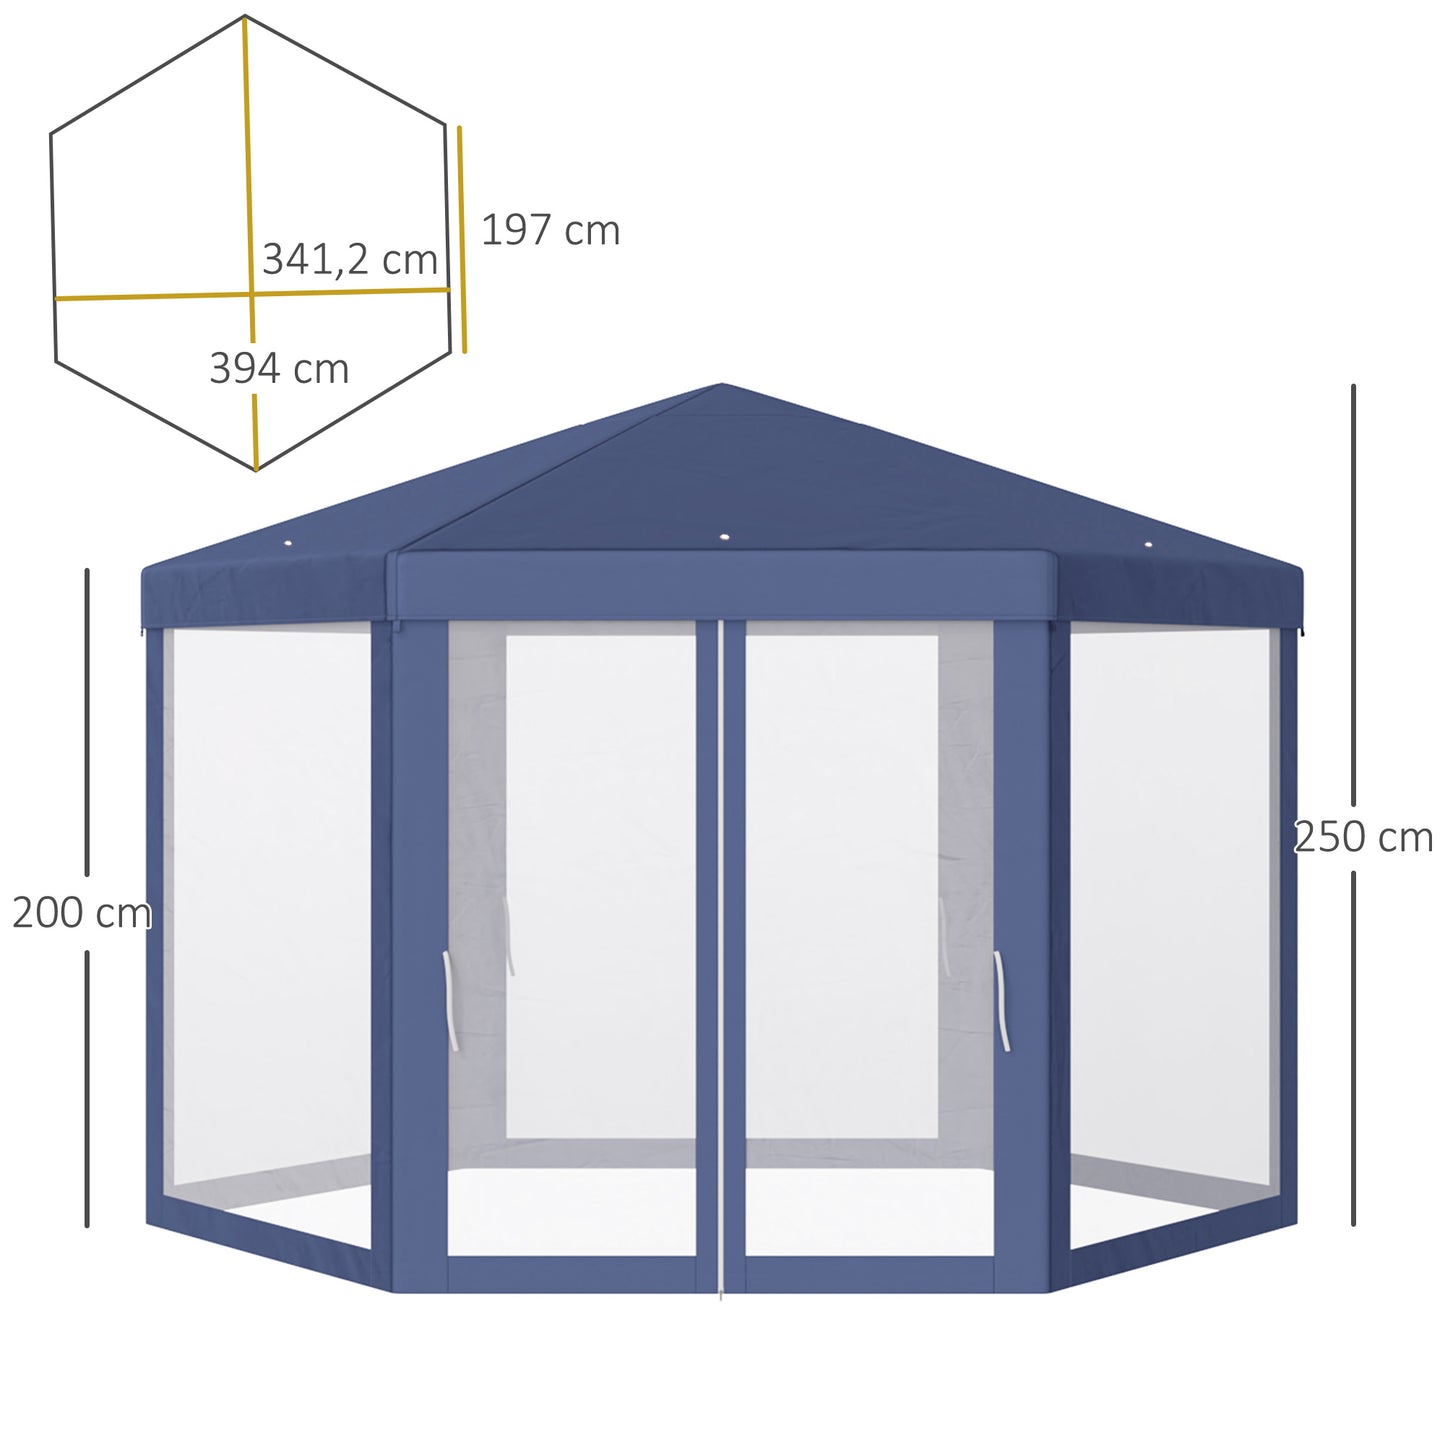 Outsunny 4M Netting Gazebo Hexagon Tent Patio Canopy Outdoor Shelter Party Activities Shade Resistant (Blue)